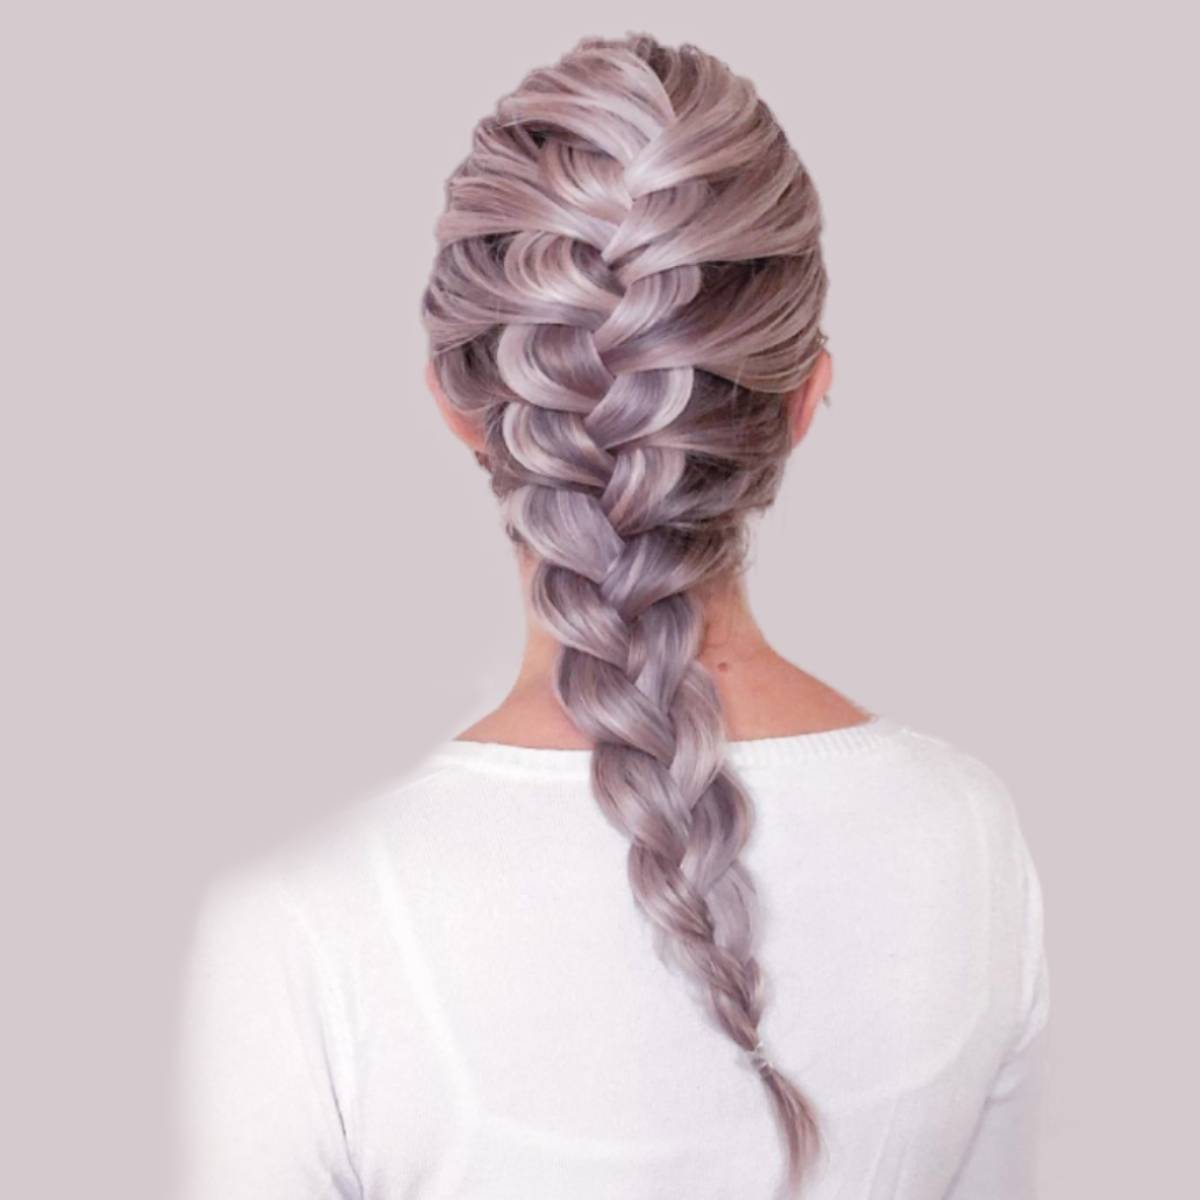 The French Braid: 30+ Incredible Ways to Get This Beautiful Braid